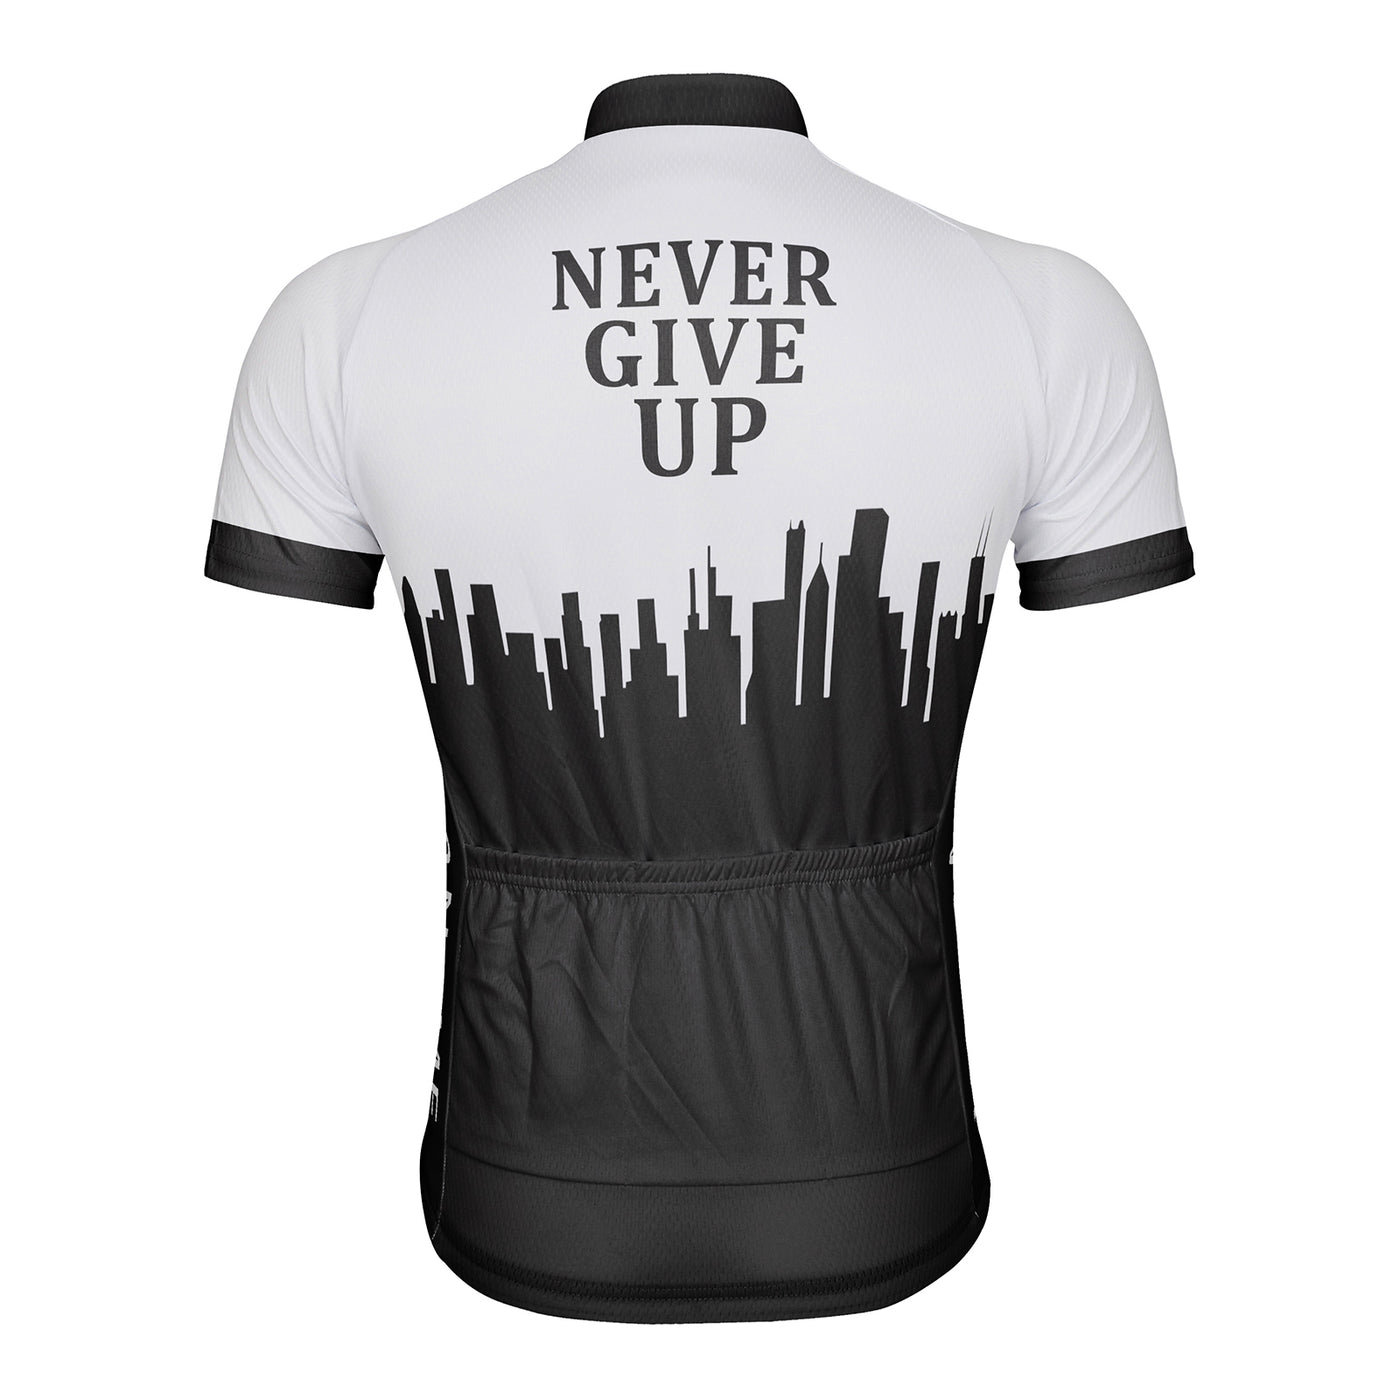 Customized Never Give Up Men's Cycling Jersey Short Sleeve